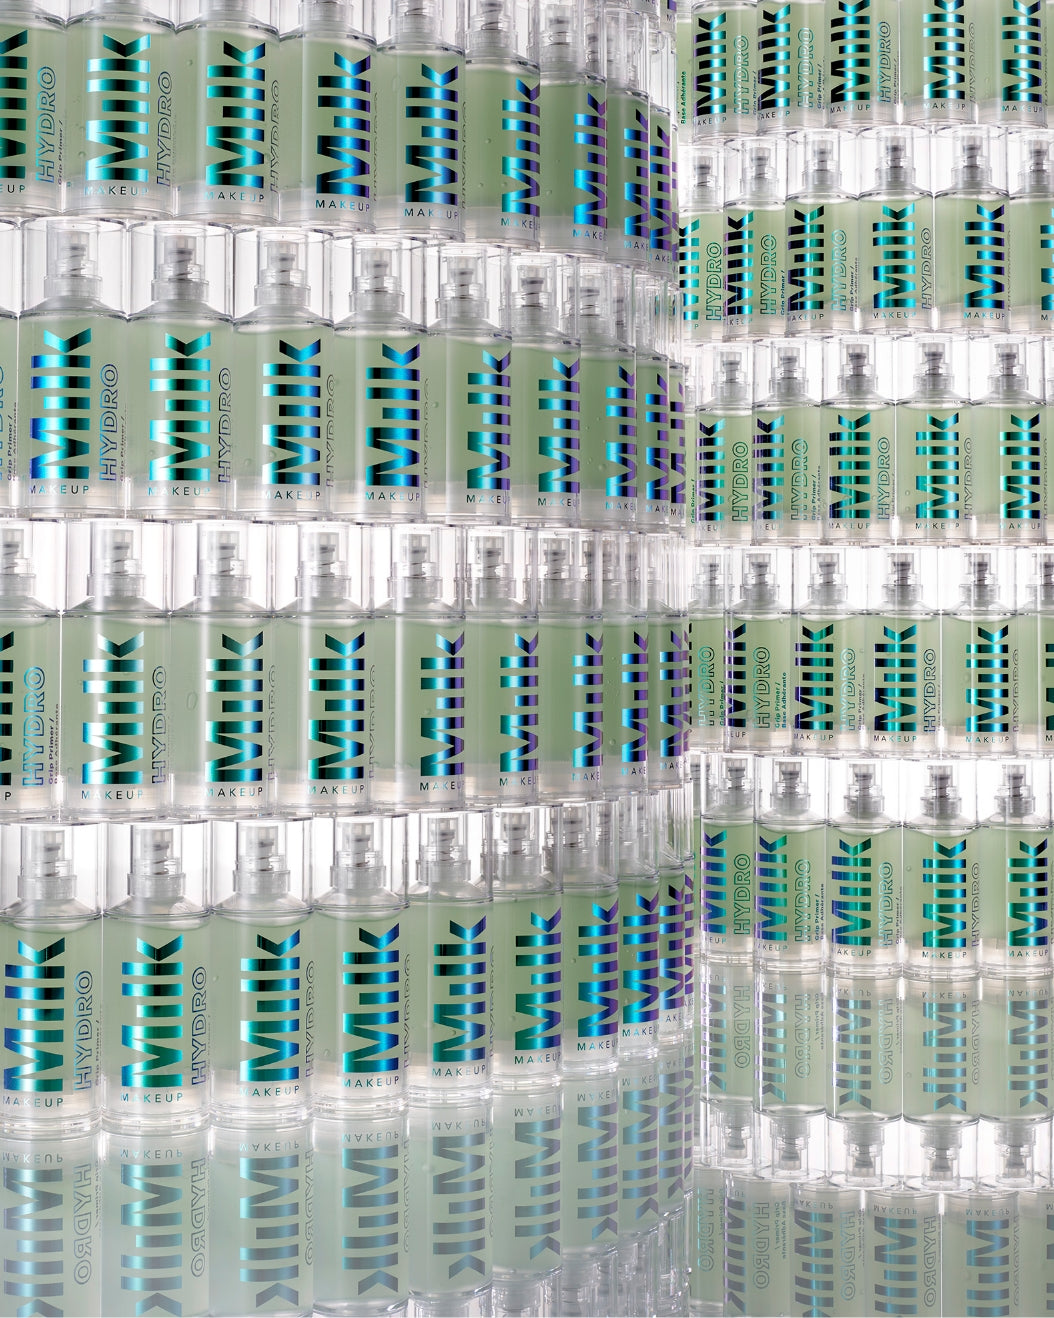 A large amount of Hydro Grip Primer bottles stacked on shelves against a white background